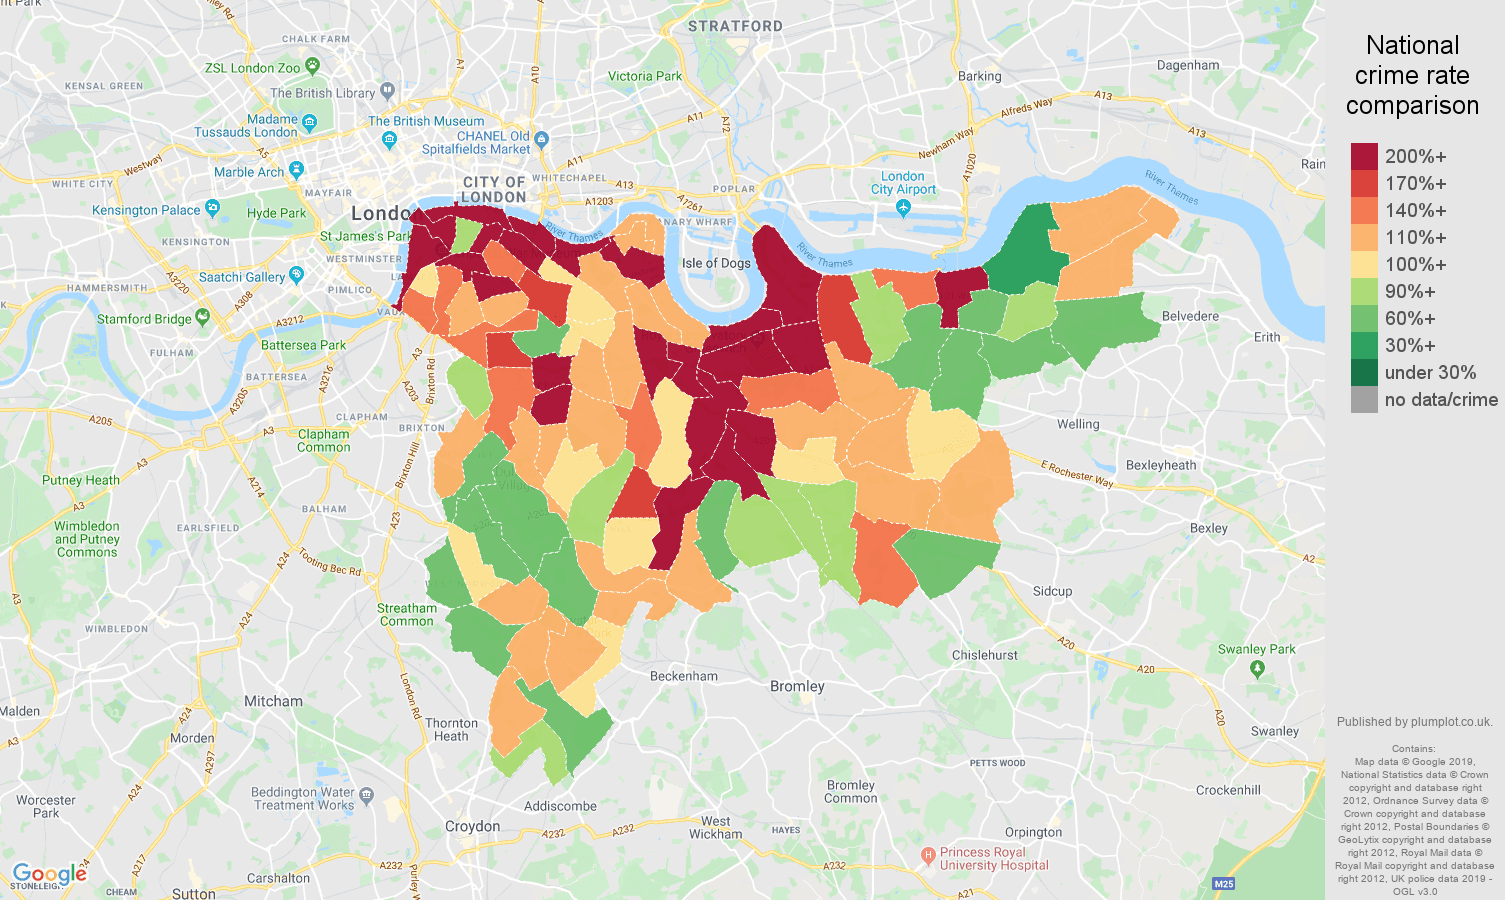 South East London other theft crime rate comparison map